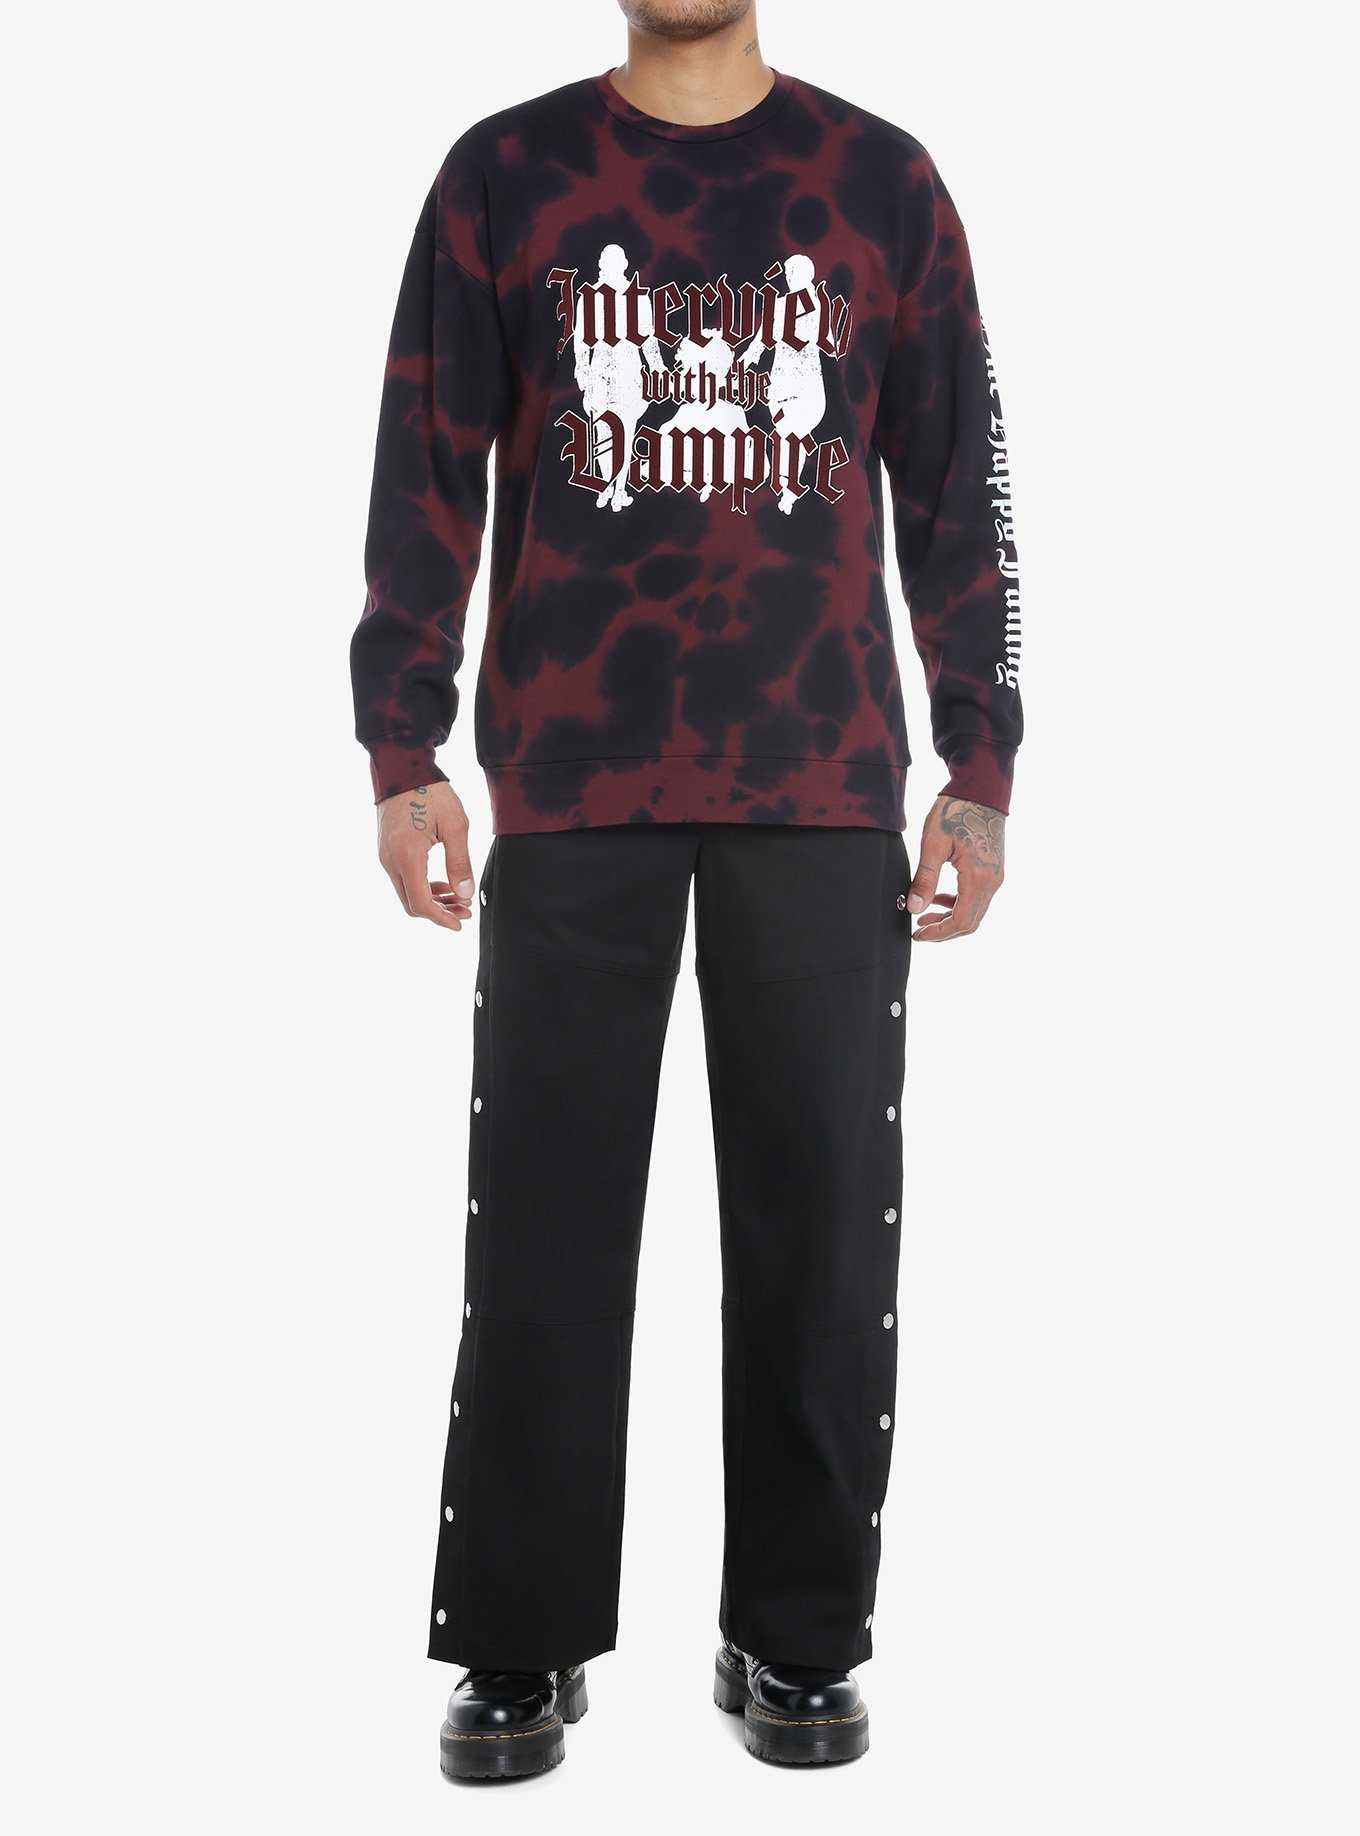 Interview With The Vampire Silhouettes Tie-Dye Sweatshirt, , hi-res